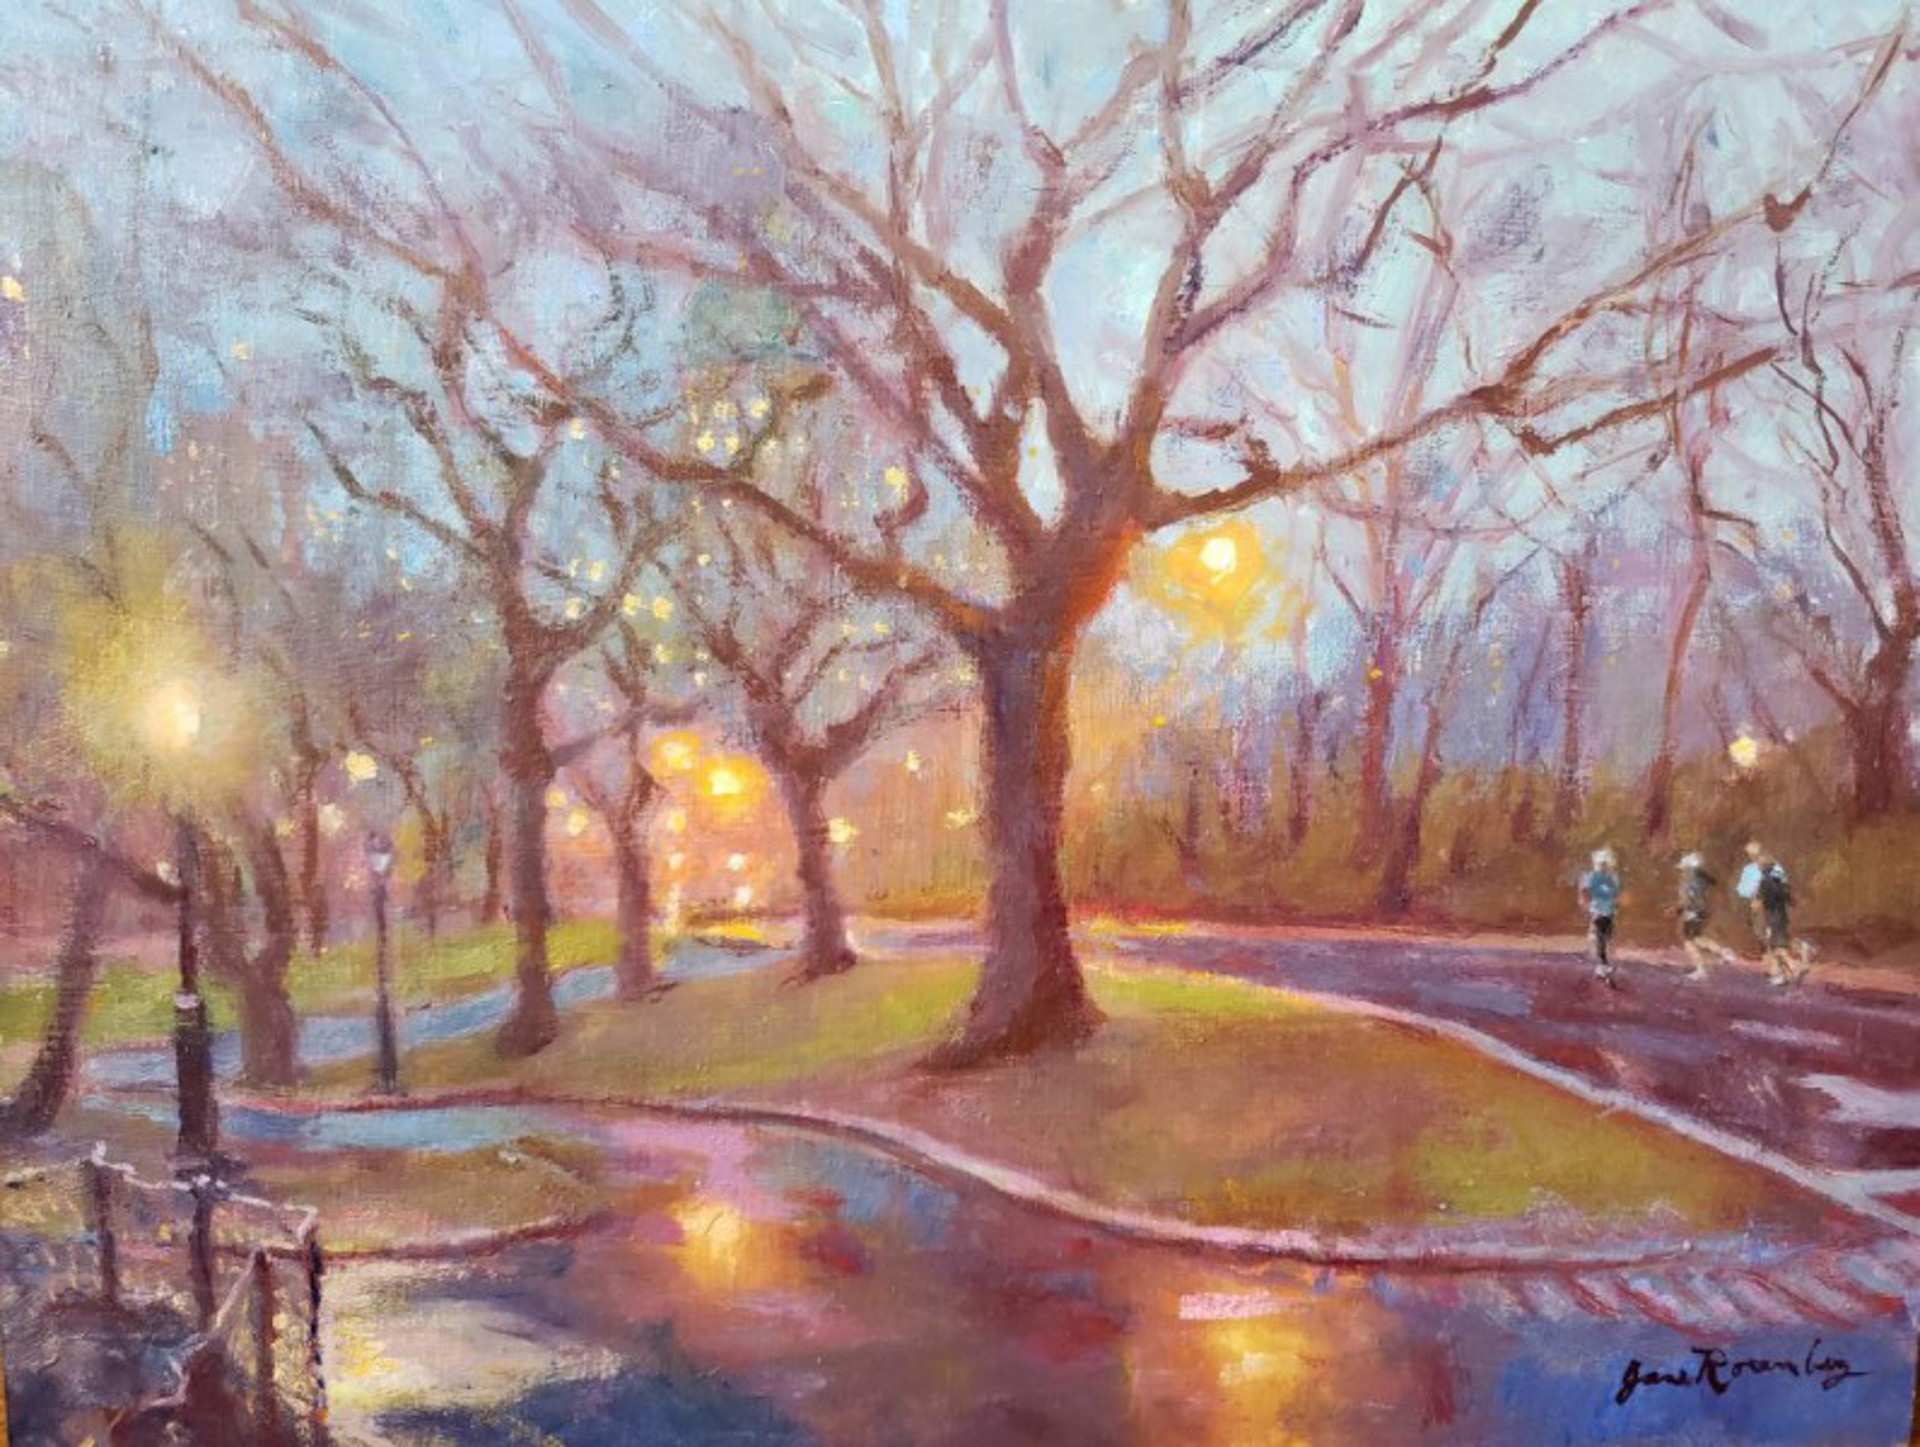 Runners in Central Park, After the Rain by Jane Rosenberg